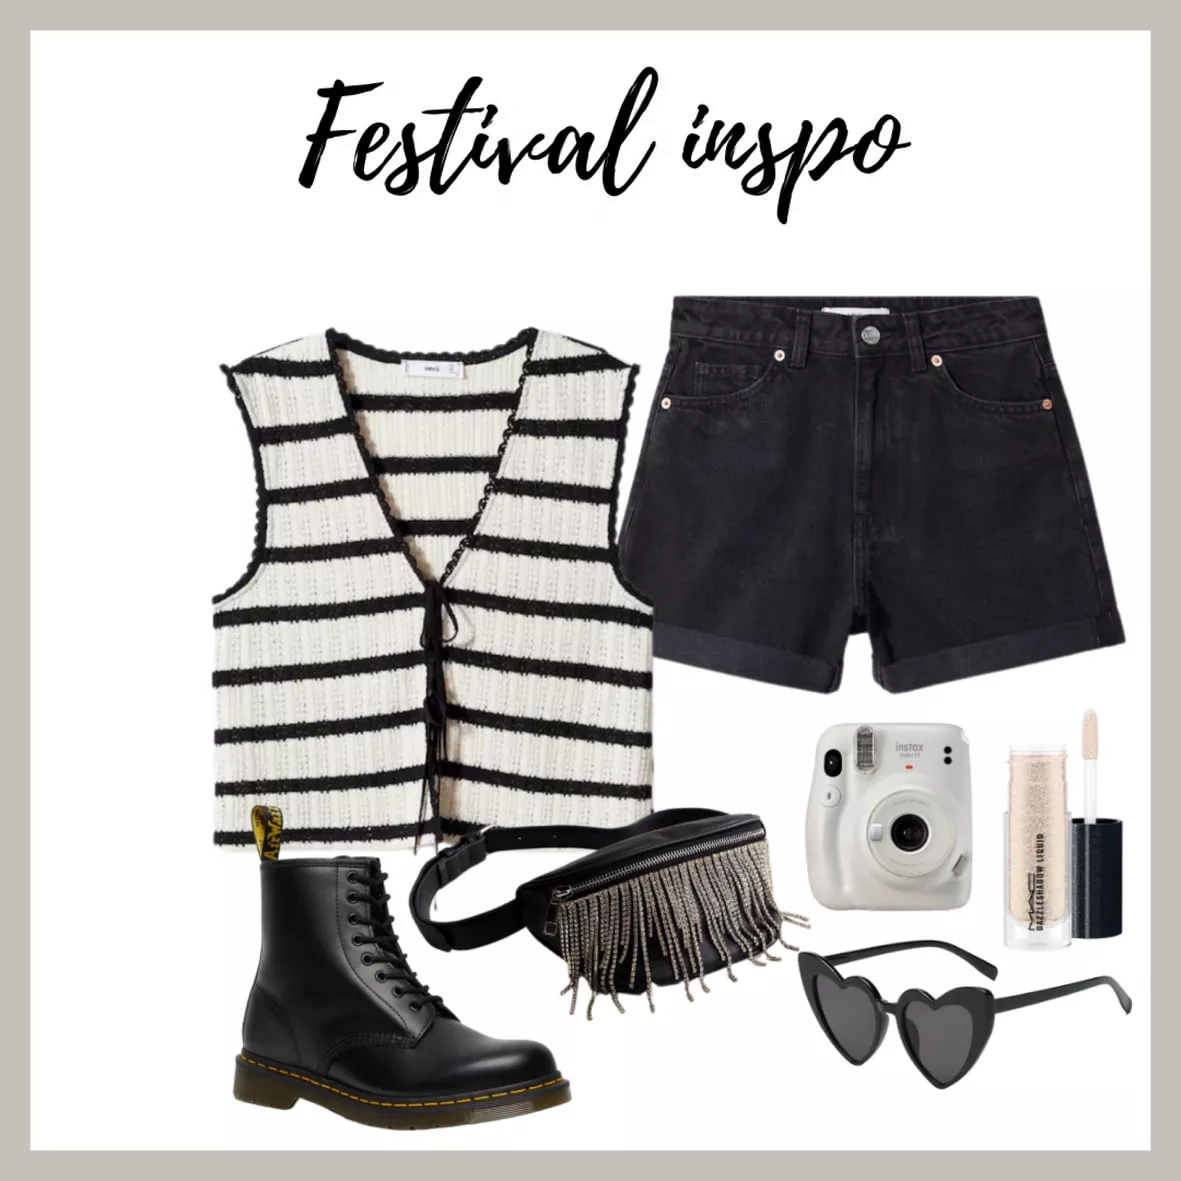 polyvore grunge outfits